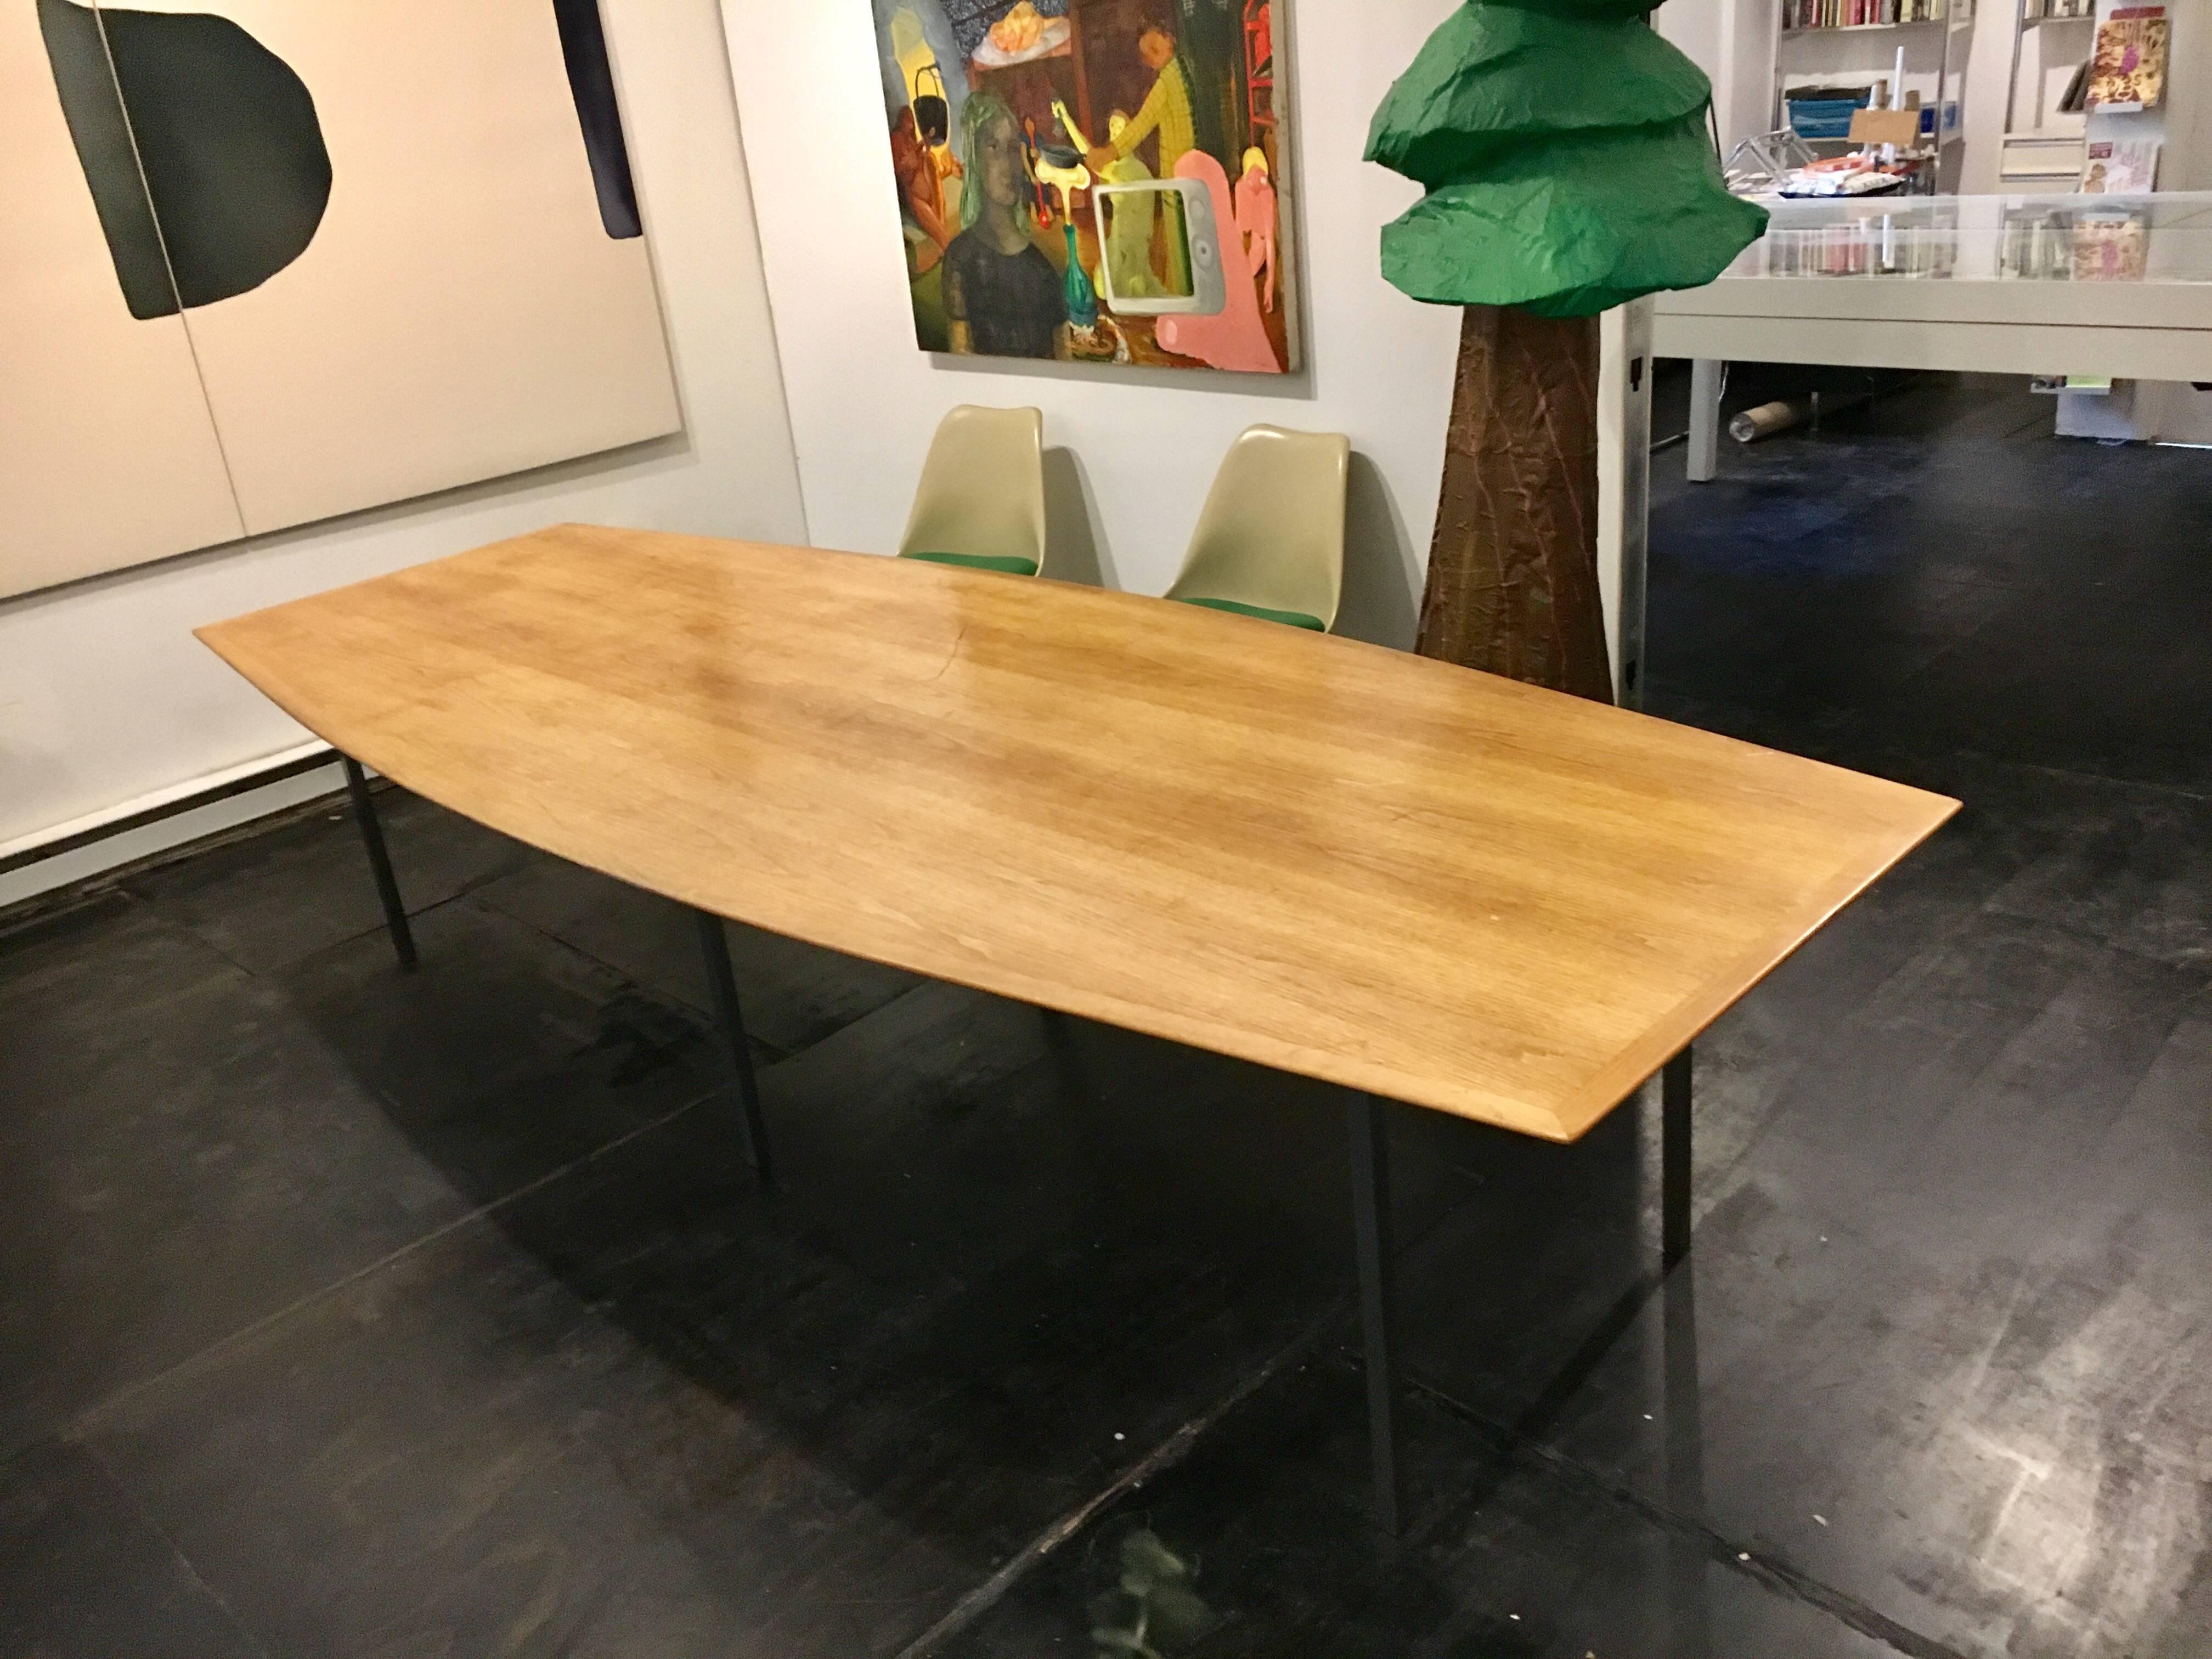 Boat shaped dining or conference table designed by Florence Knoll for Knoll.
Oak to and steel. Measures: 124" Long.